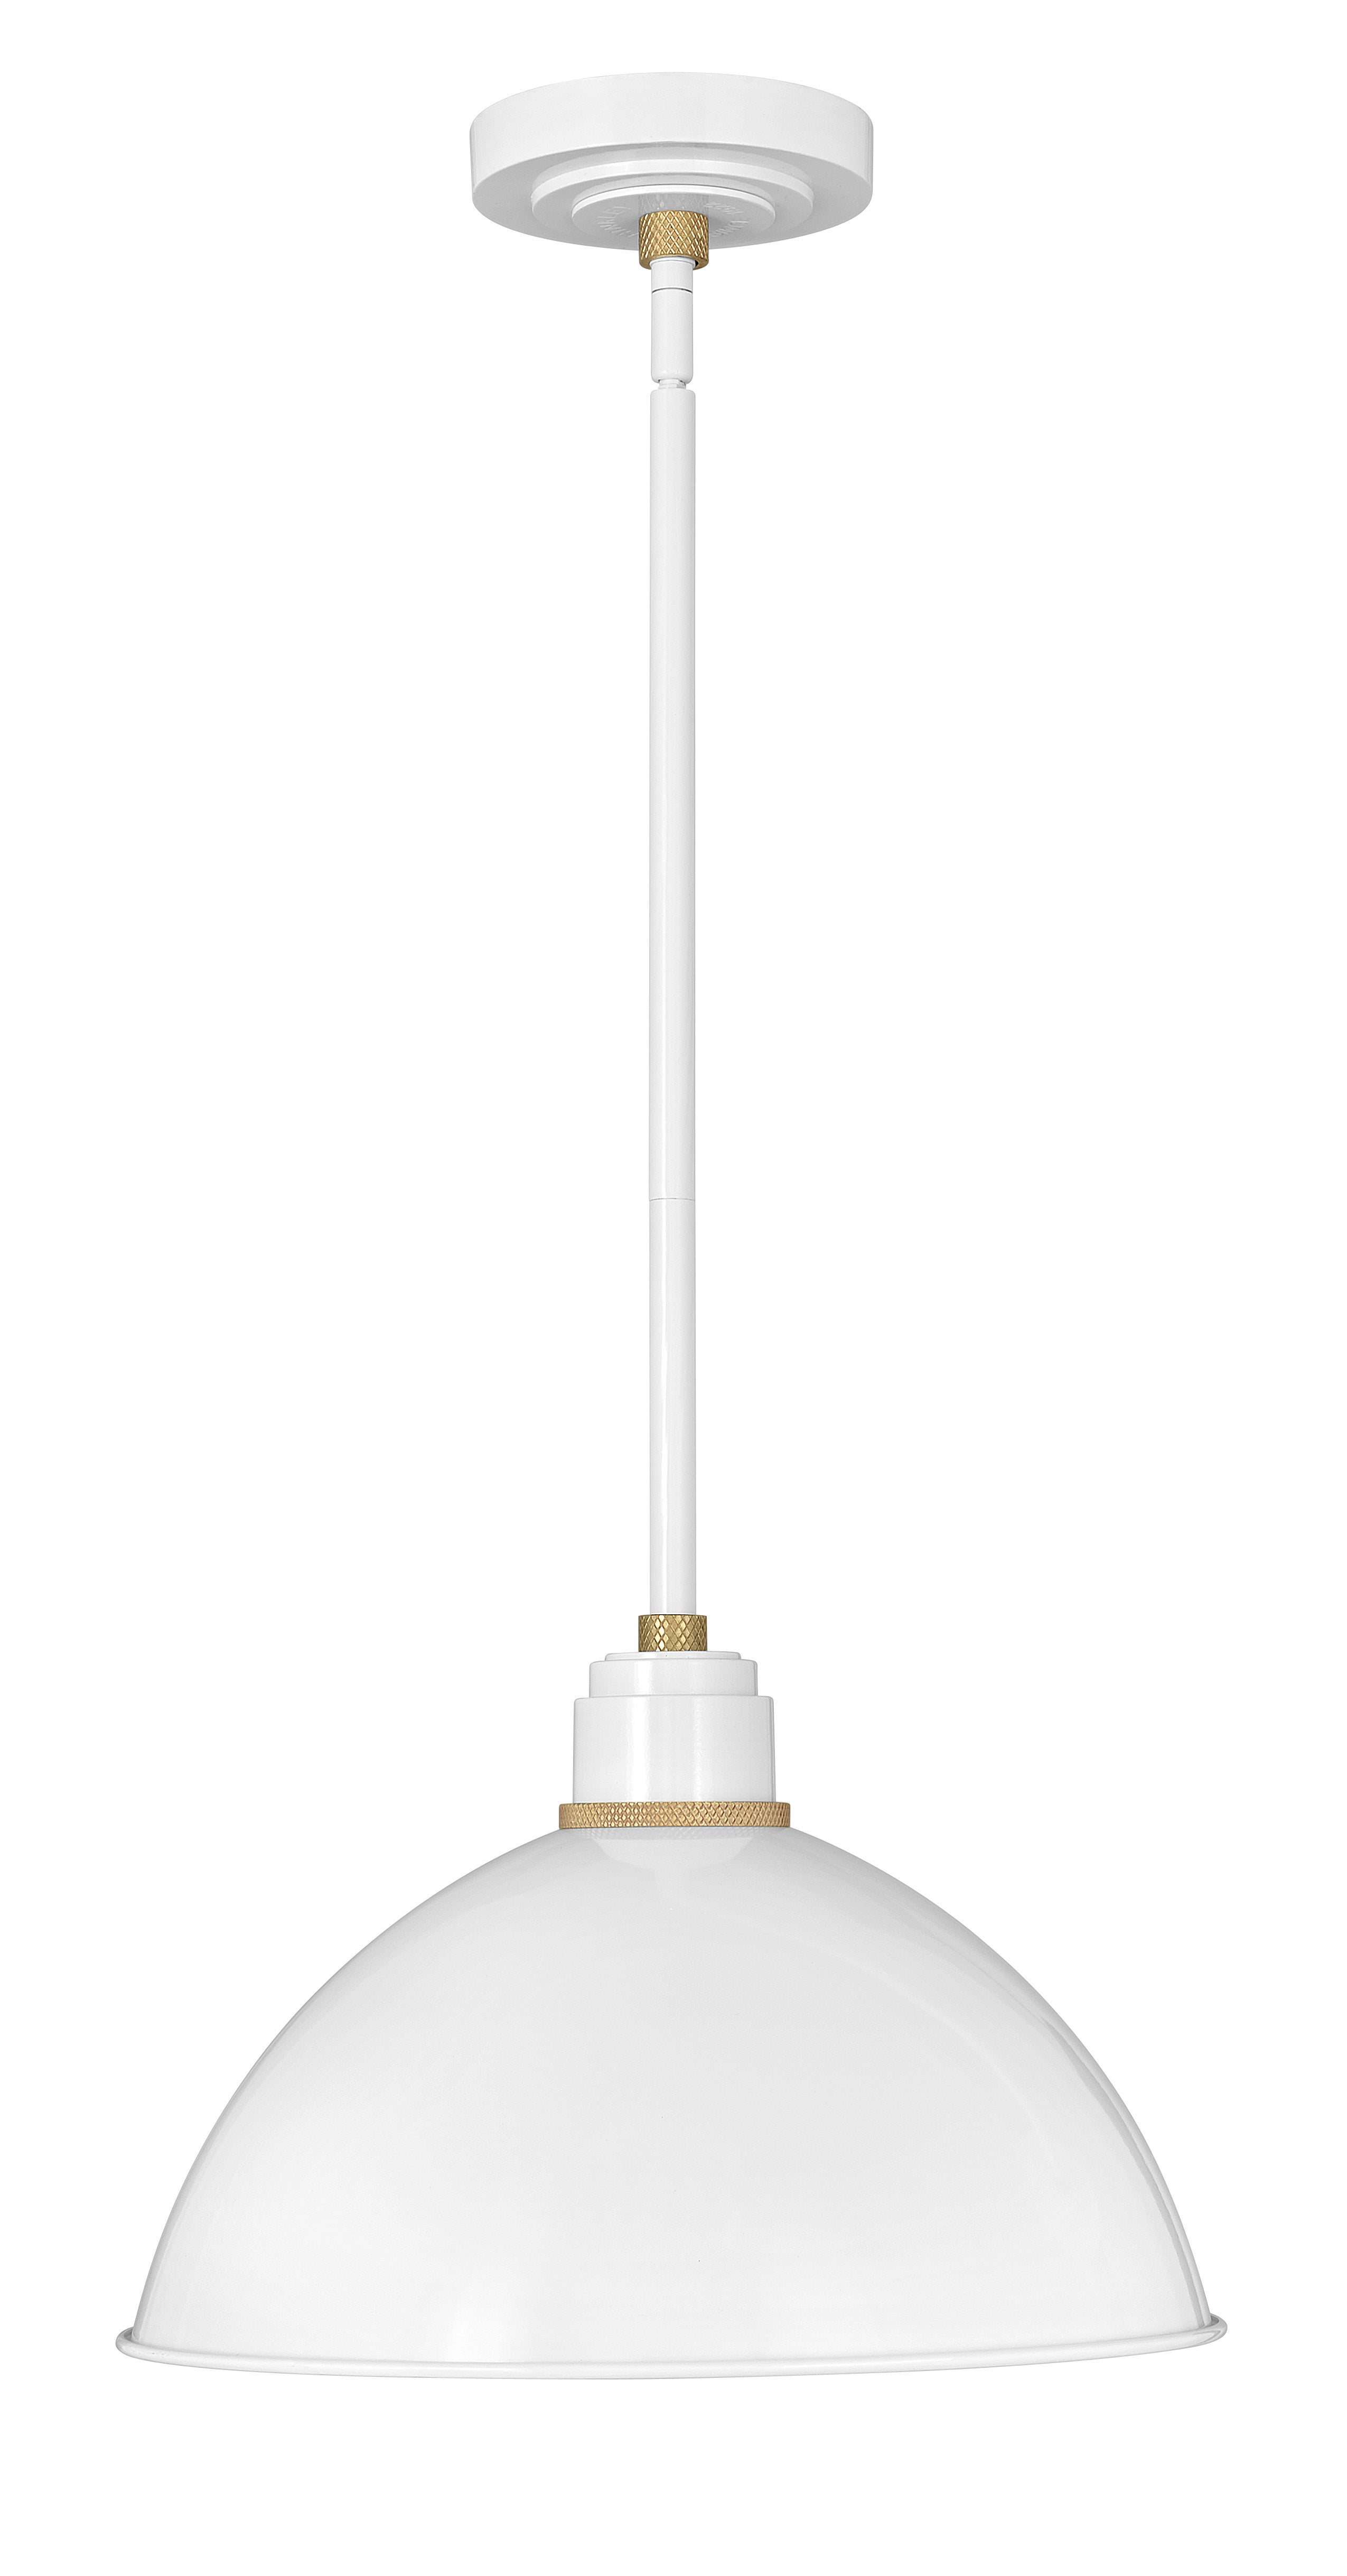 FOUNDRY DOME Outdoor pendant White - 10685GW | HINKLEY